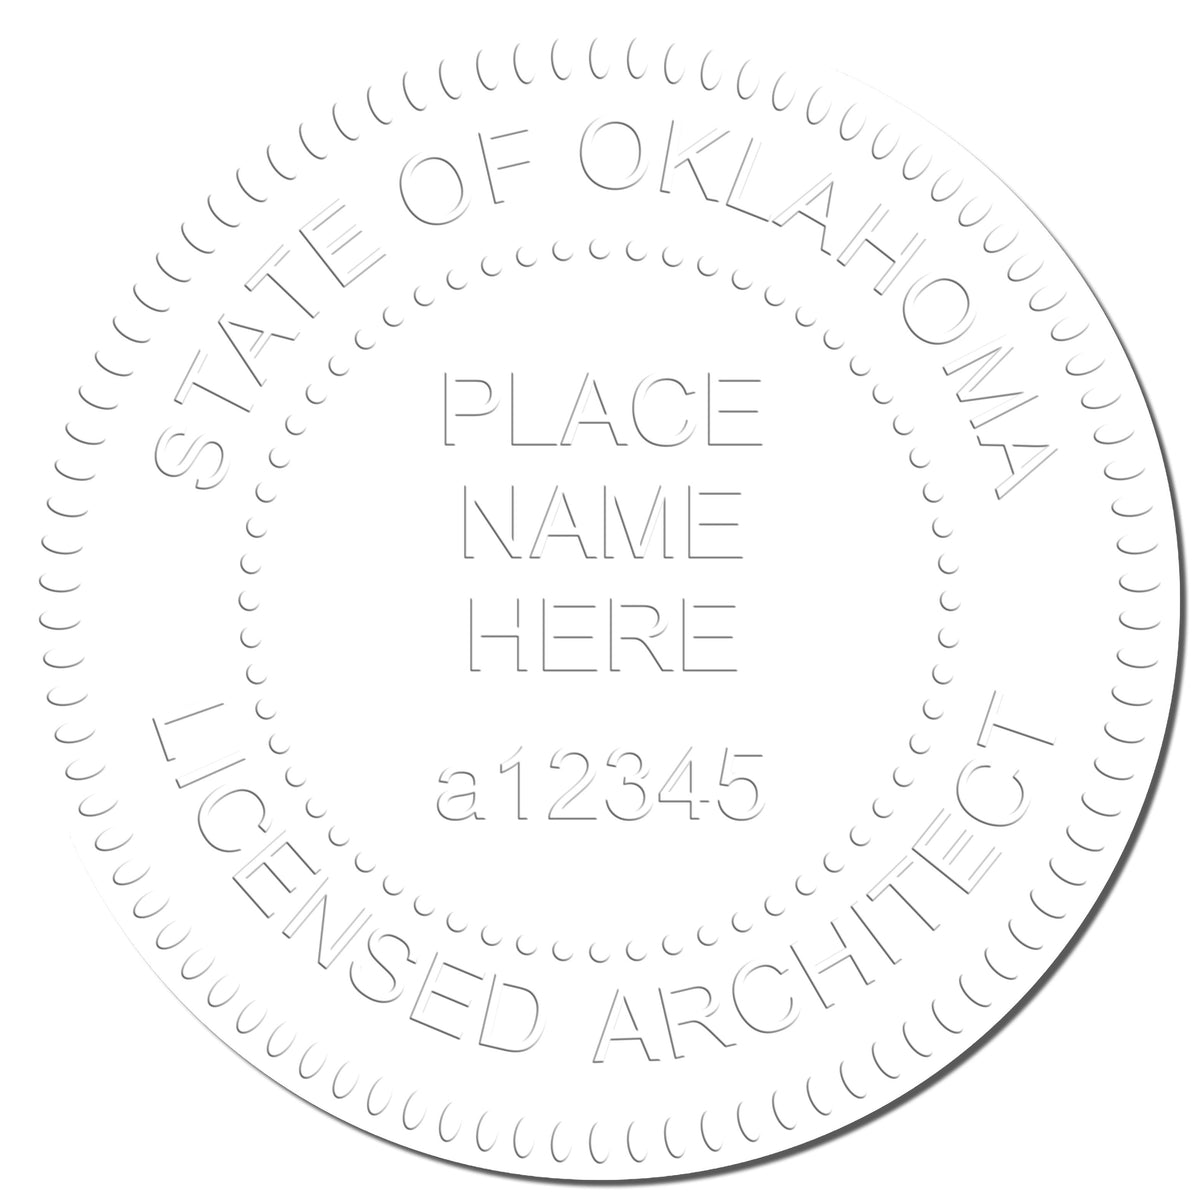 This paper is stamped with a sample imprint of the Gift Oklahoma Architect Seal, signifying its quality and reliability.